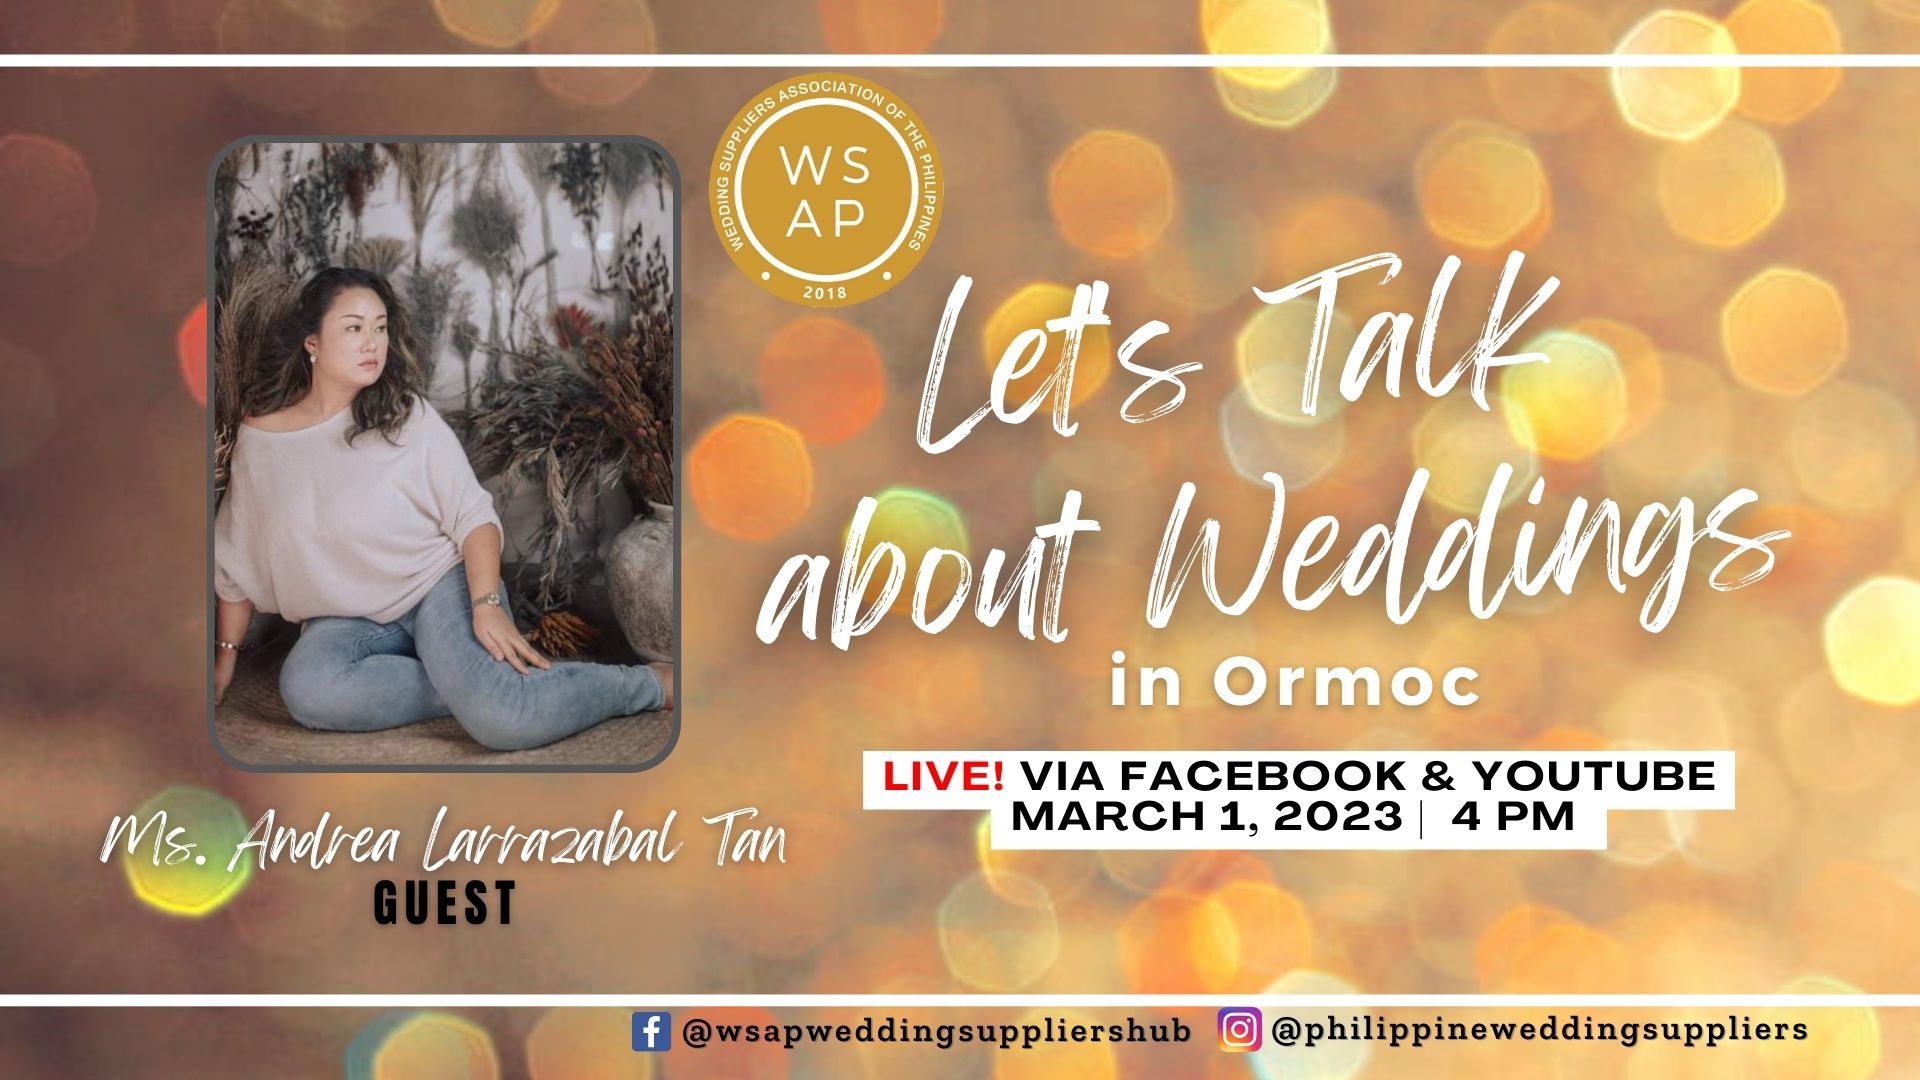 Let's Talk About Weddings with Ms. Andrea Larrazabal Tan